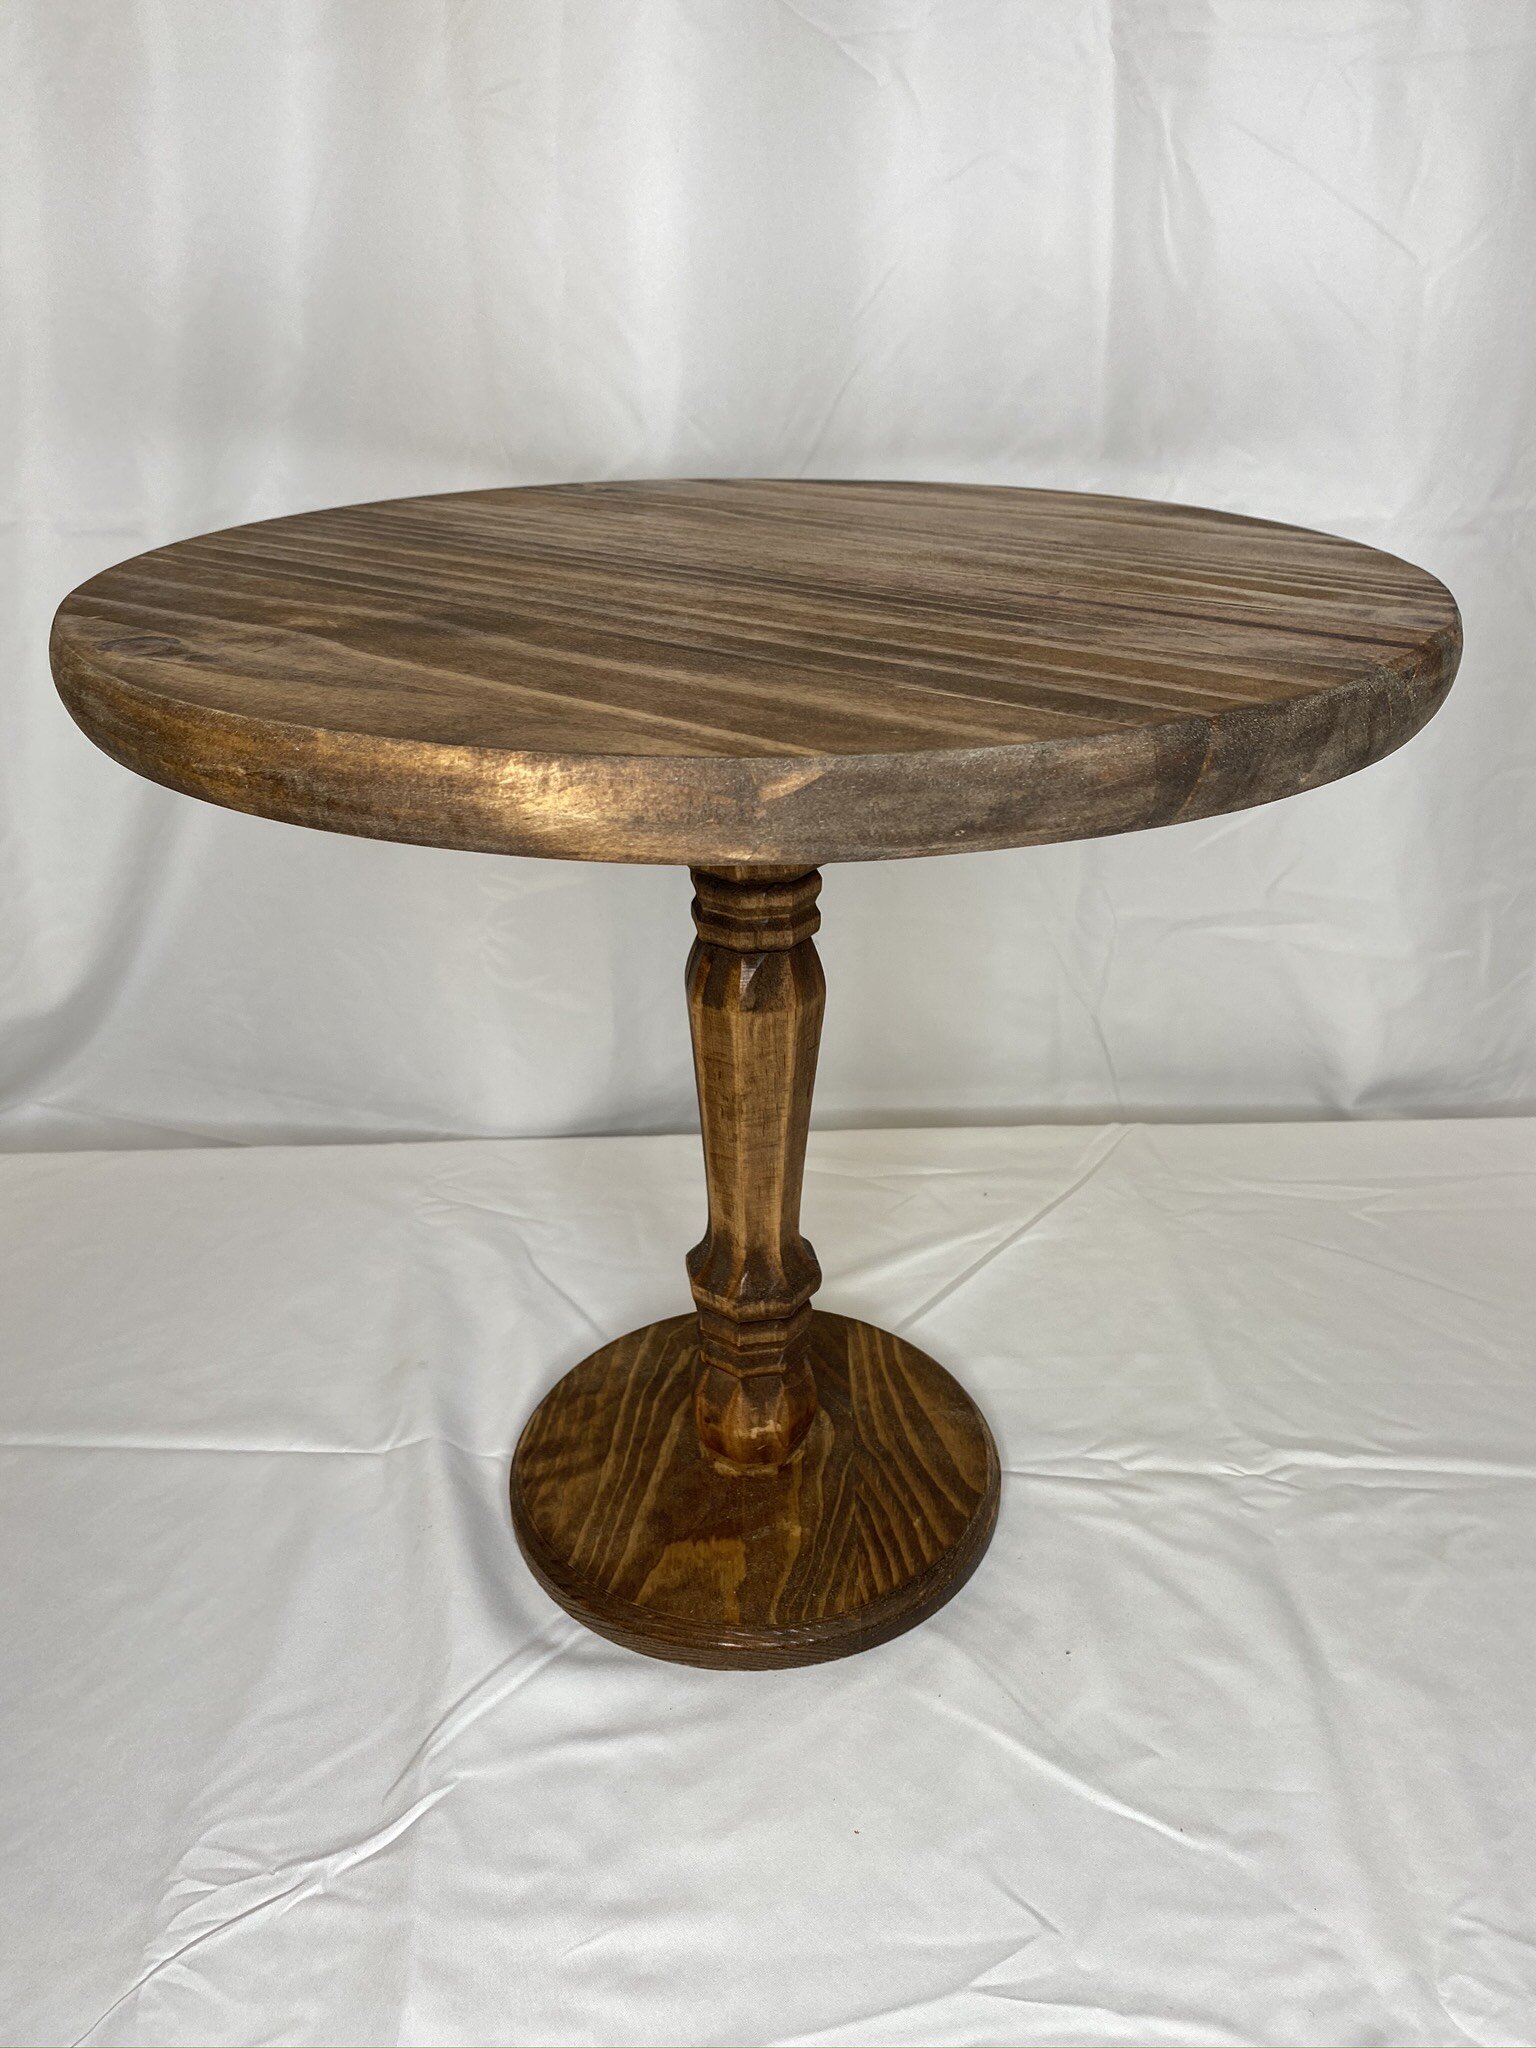 14"  and 9" Wood Cake stand $15